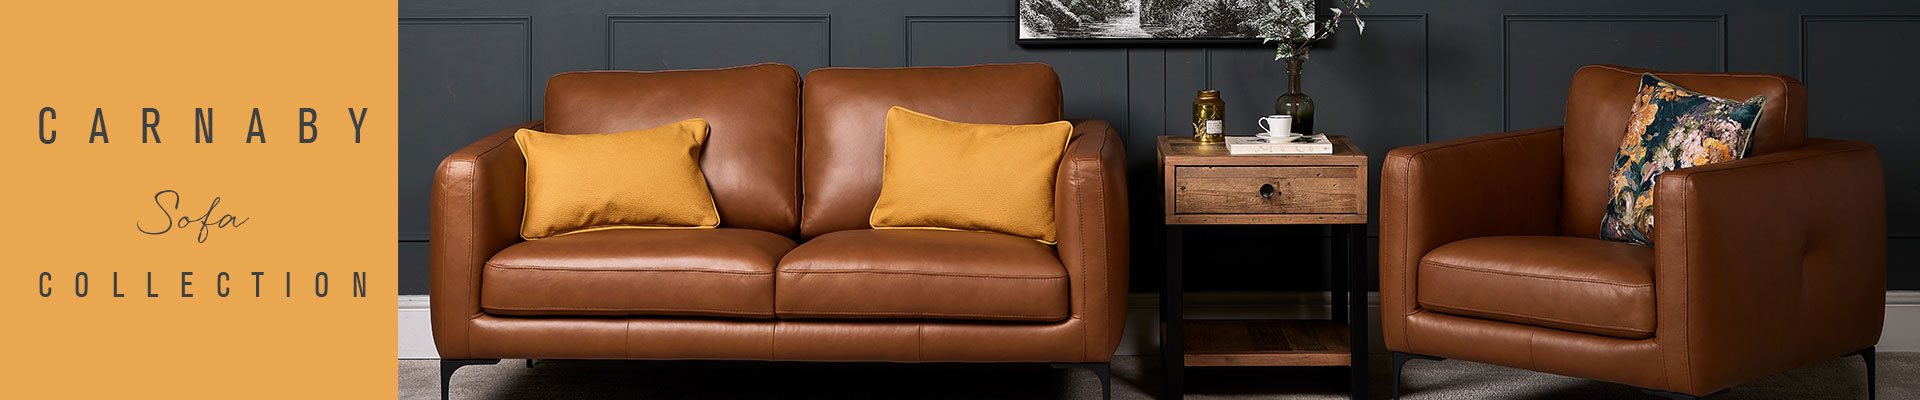 Carnaby Sofa Collection